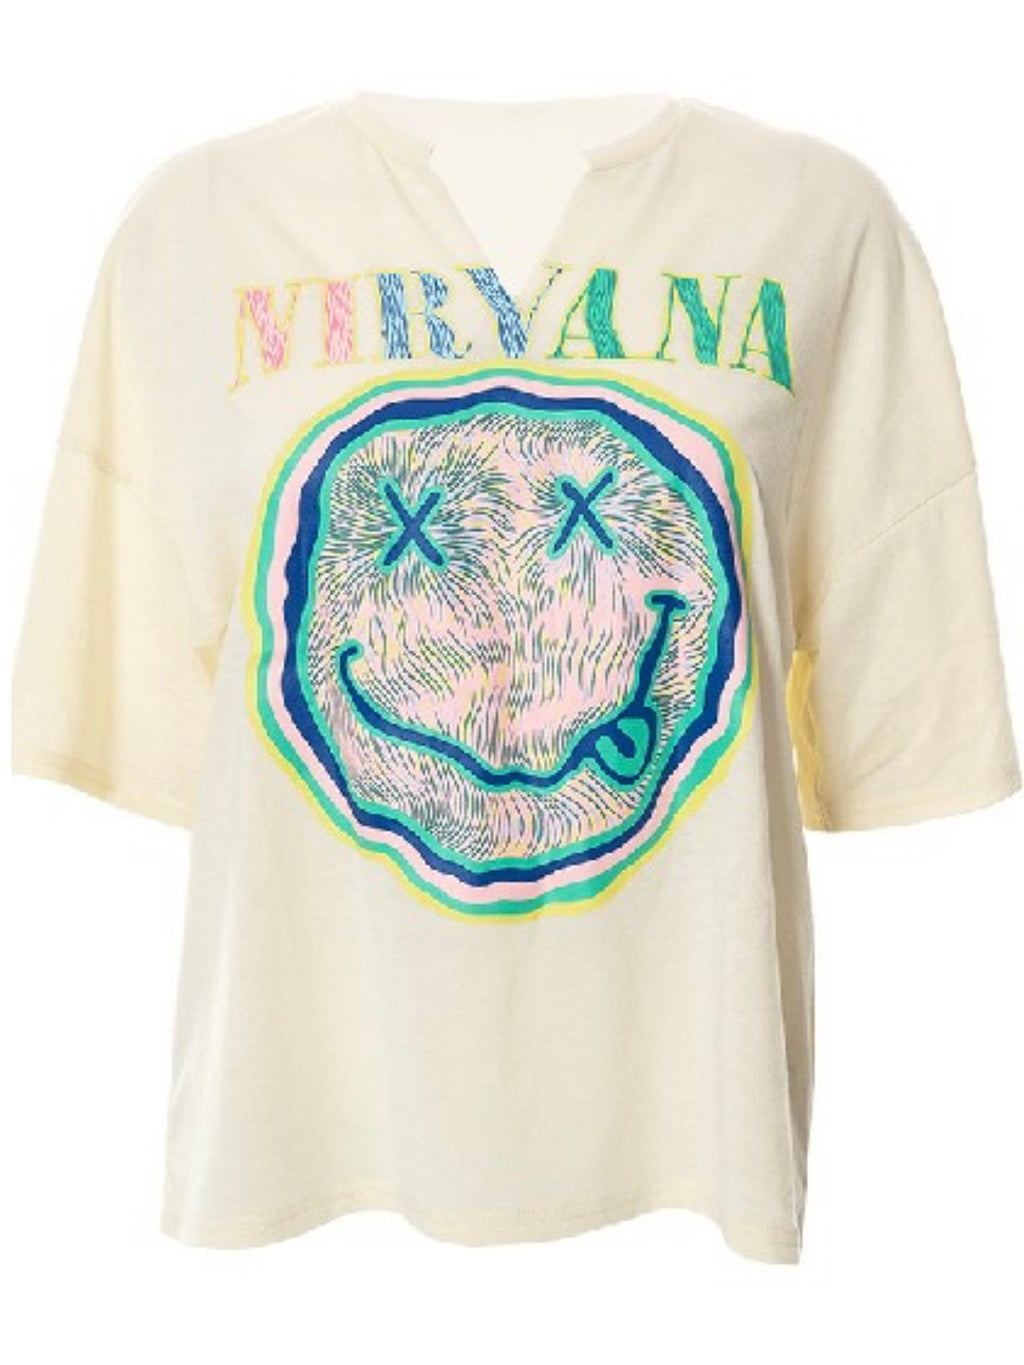 “Smiley Face” Nirvana Graphic T-Shirt